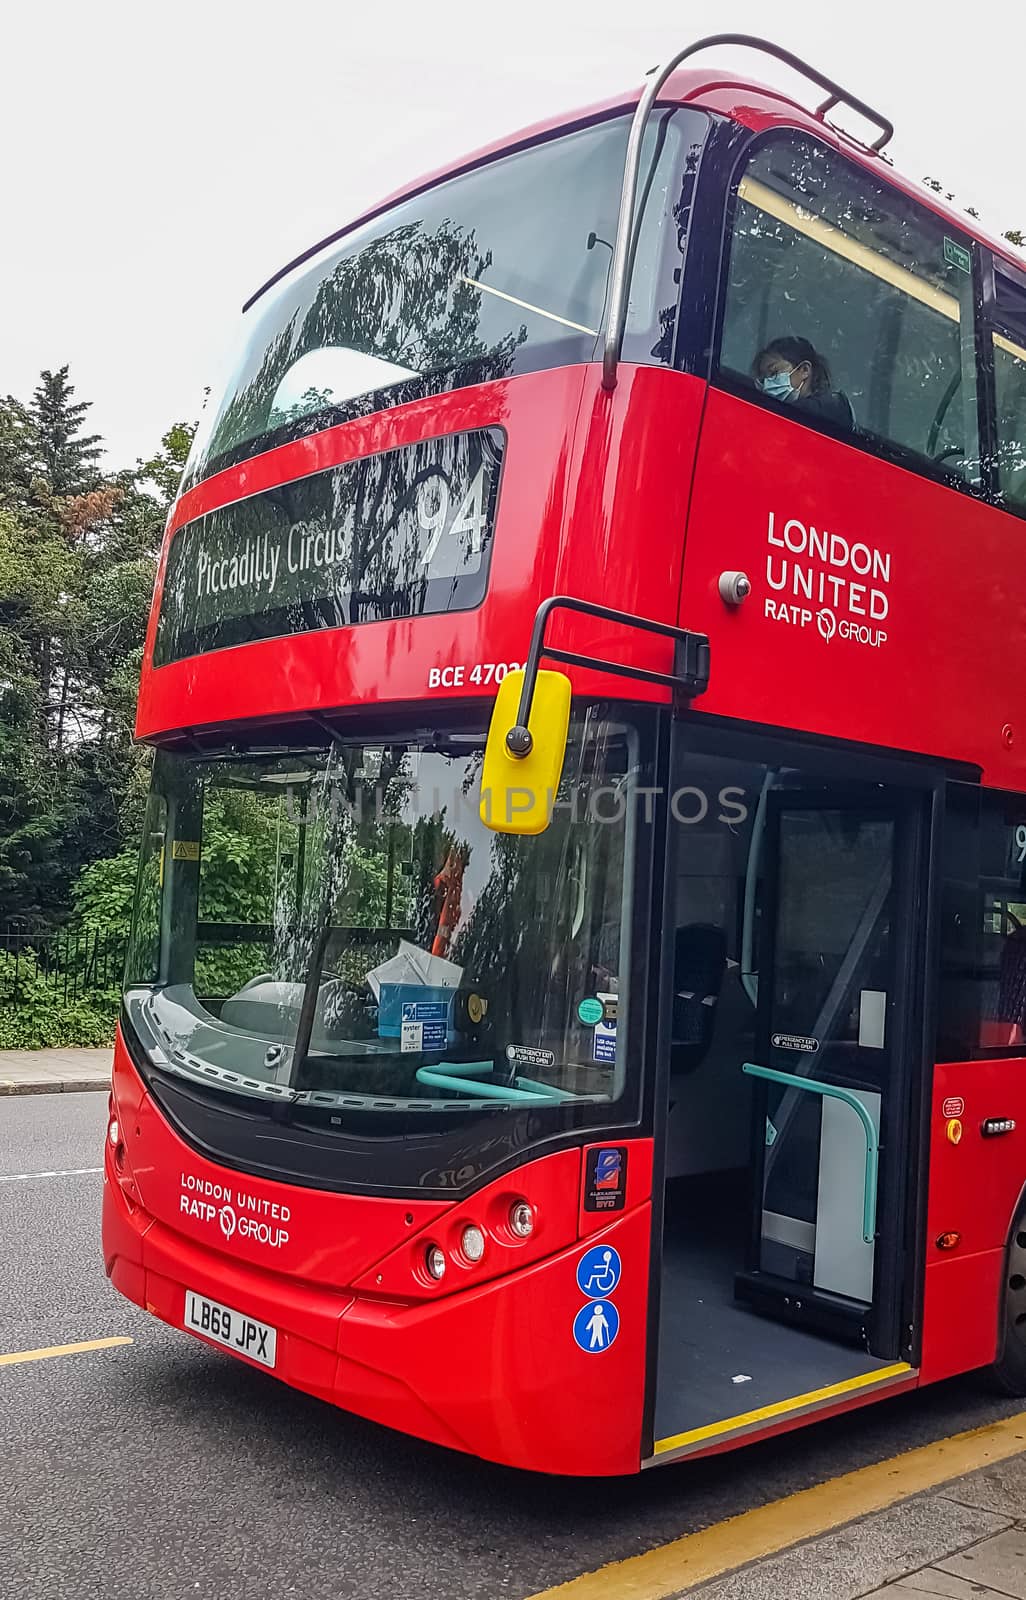 London, UK - July 8, 2020: Modern red double-decker bus is waiting for people in central London by DamantisZ